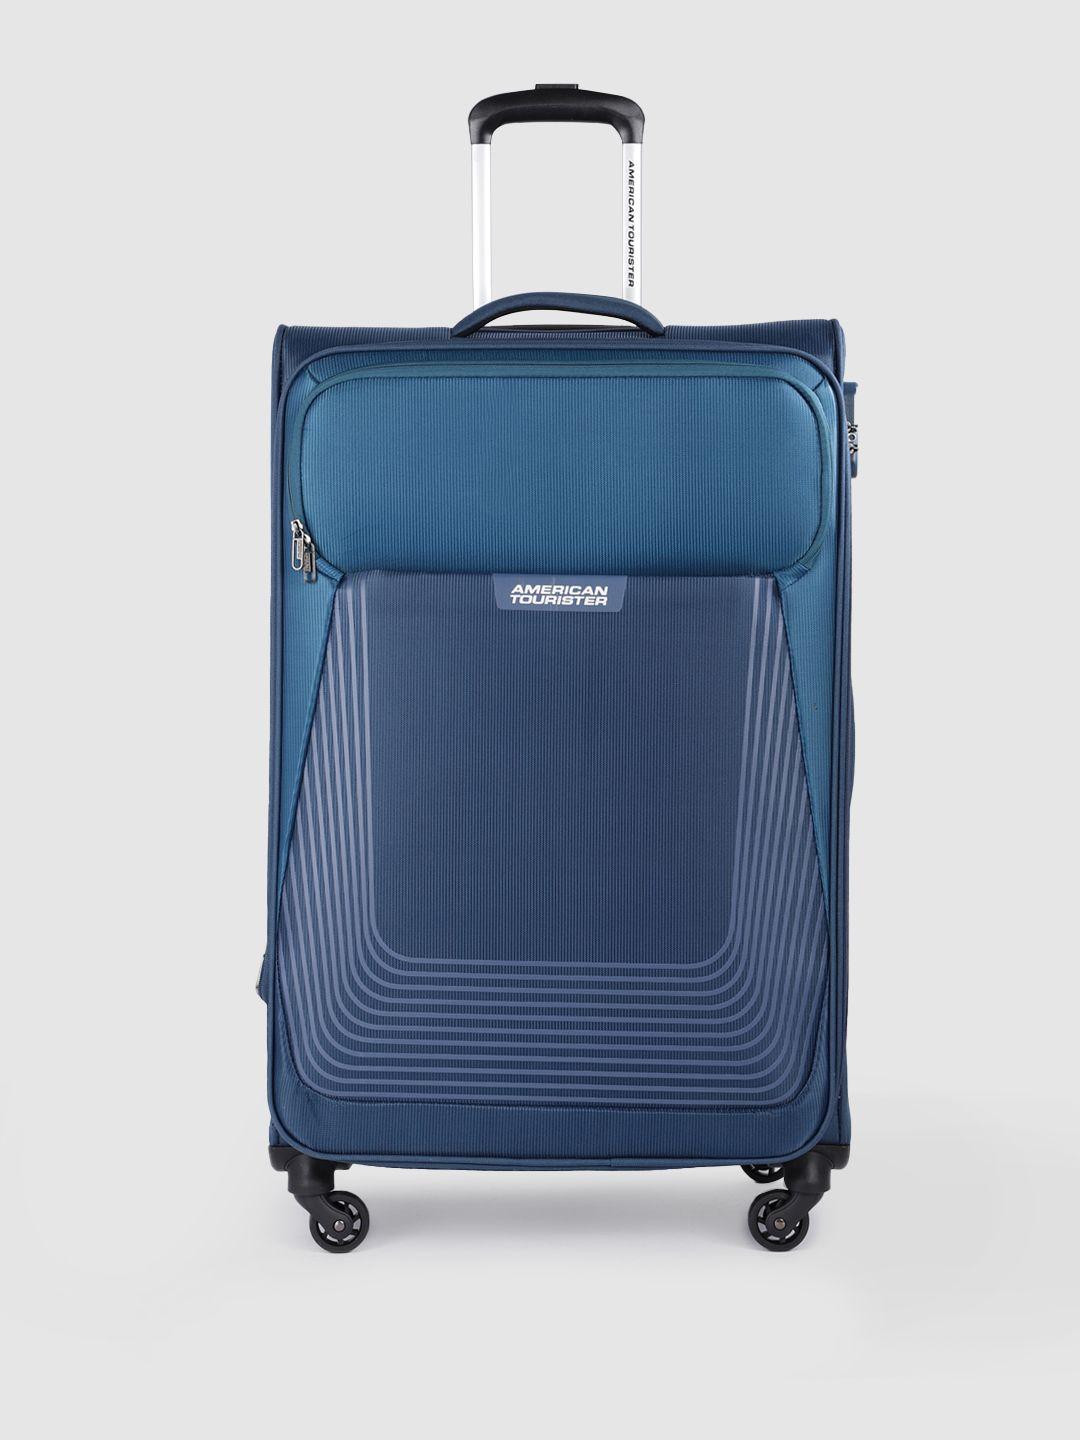 american-tourister-southside-lite-soft-large-trolley-suitcase